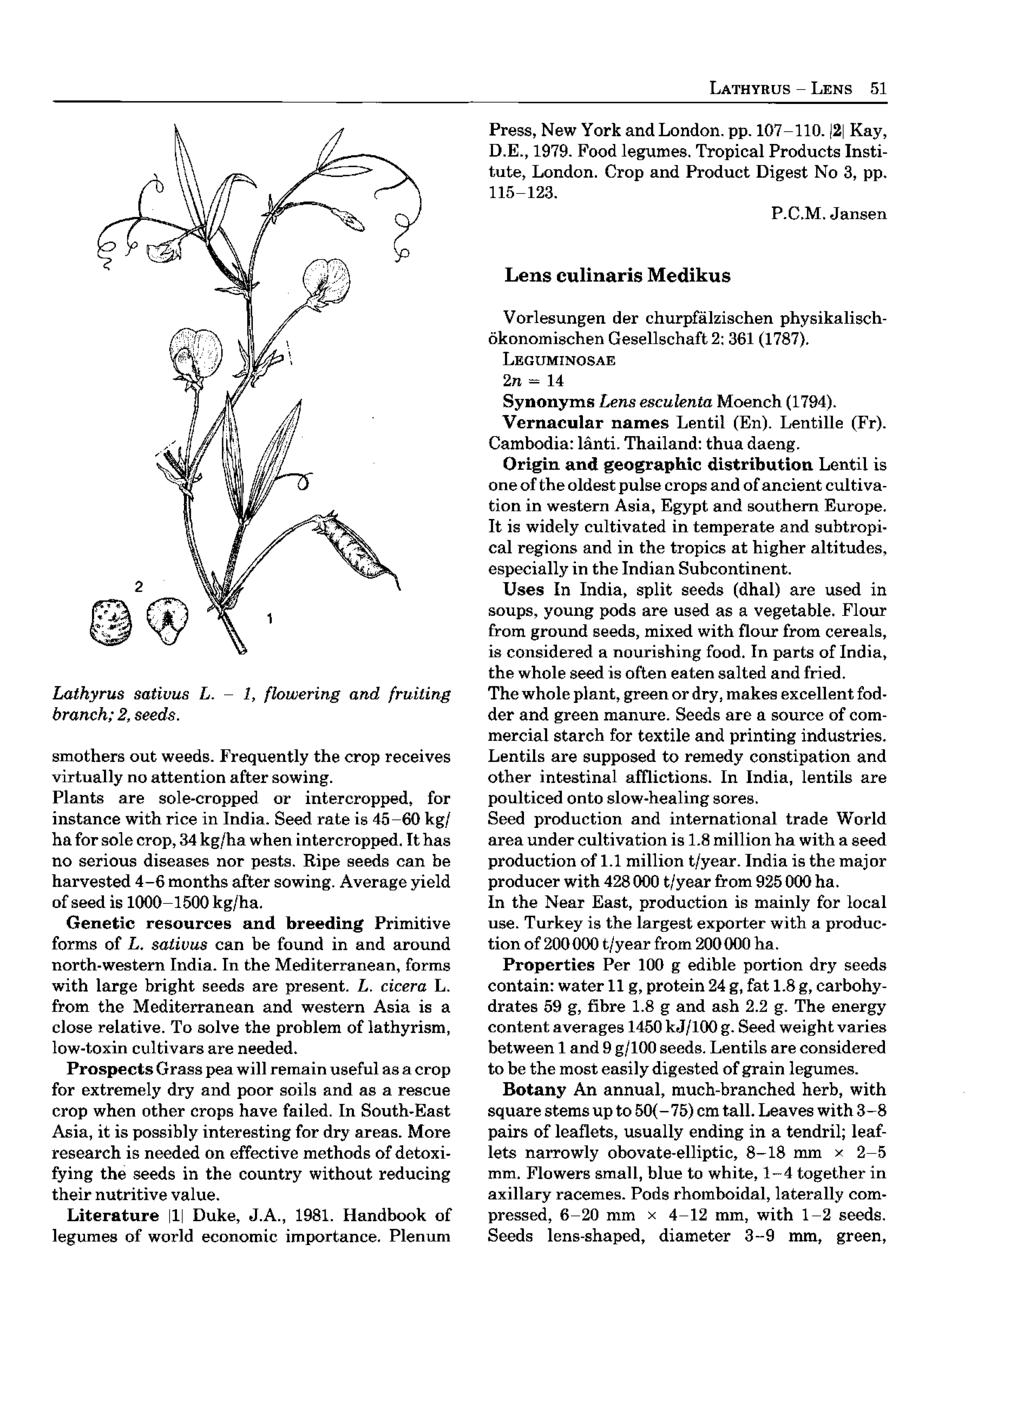 LATHYRUS - LENS 51 Press, New York and London, pp. 107-110. 2 Kay, D.E., 1979. Food legumes. Tropical Products Institute, London. Crop and Product Digest No 3, pp. 115-123. P.C.M.